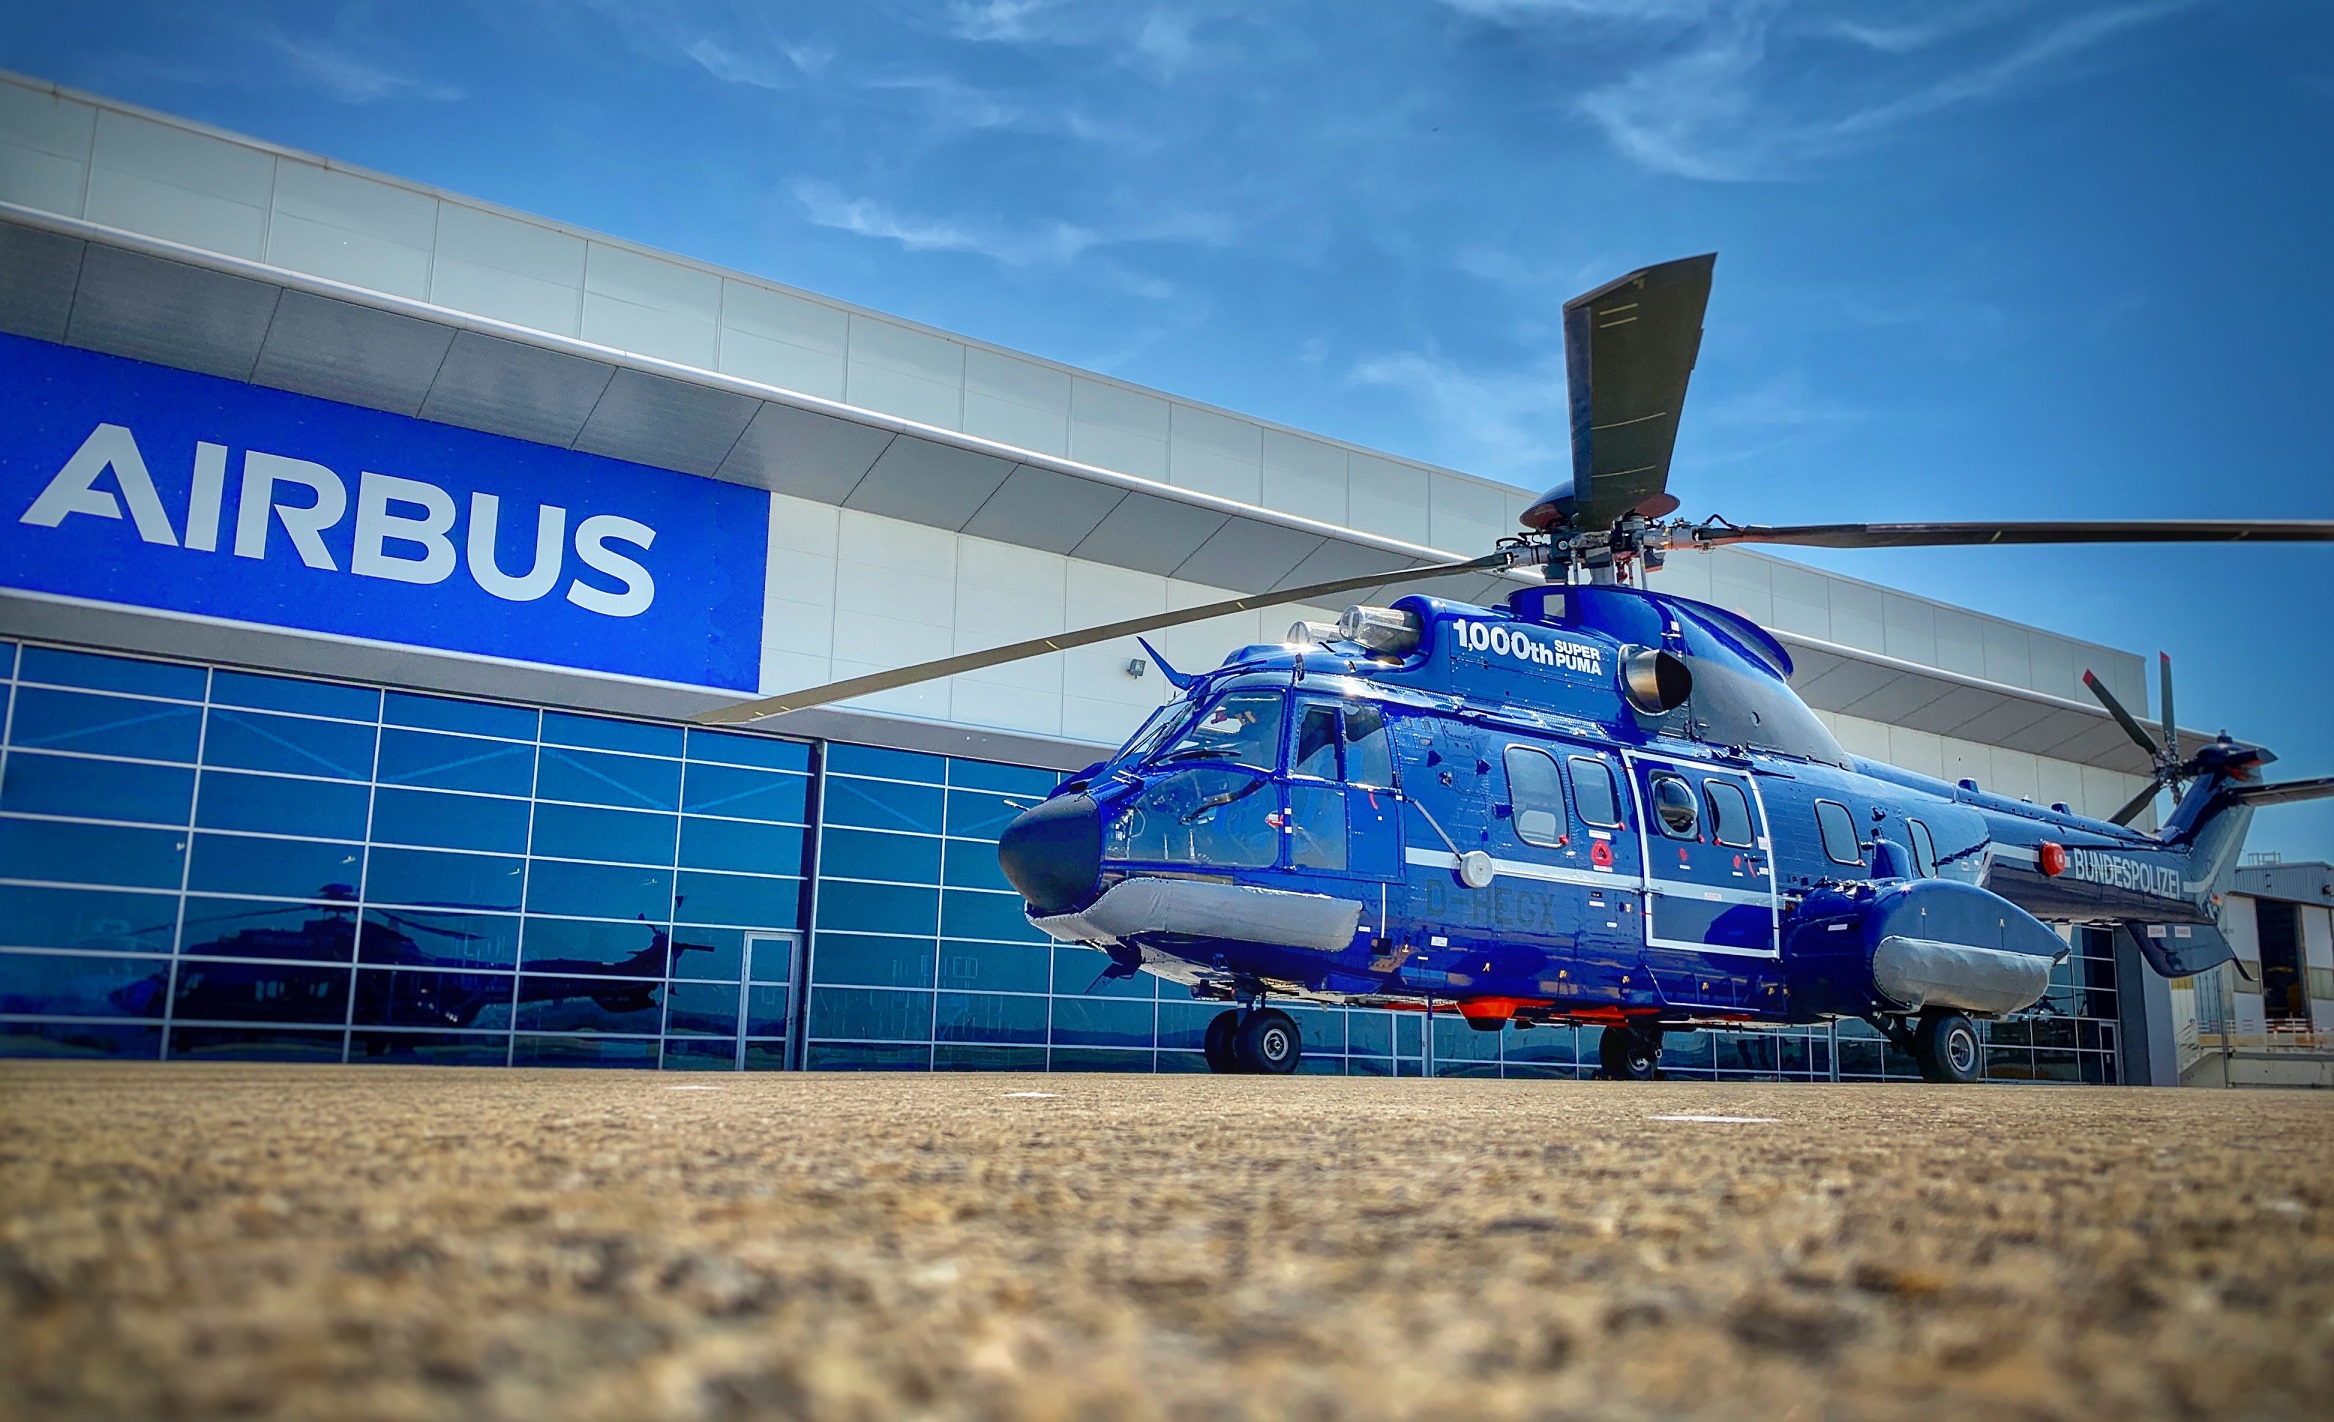 https://img3.s3wfg.com/web/img/images_uploaded/8/f/airbus-helicopters-super-puma.jpg